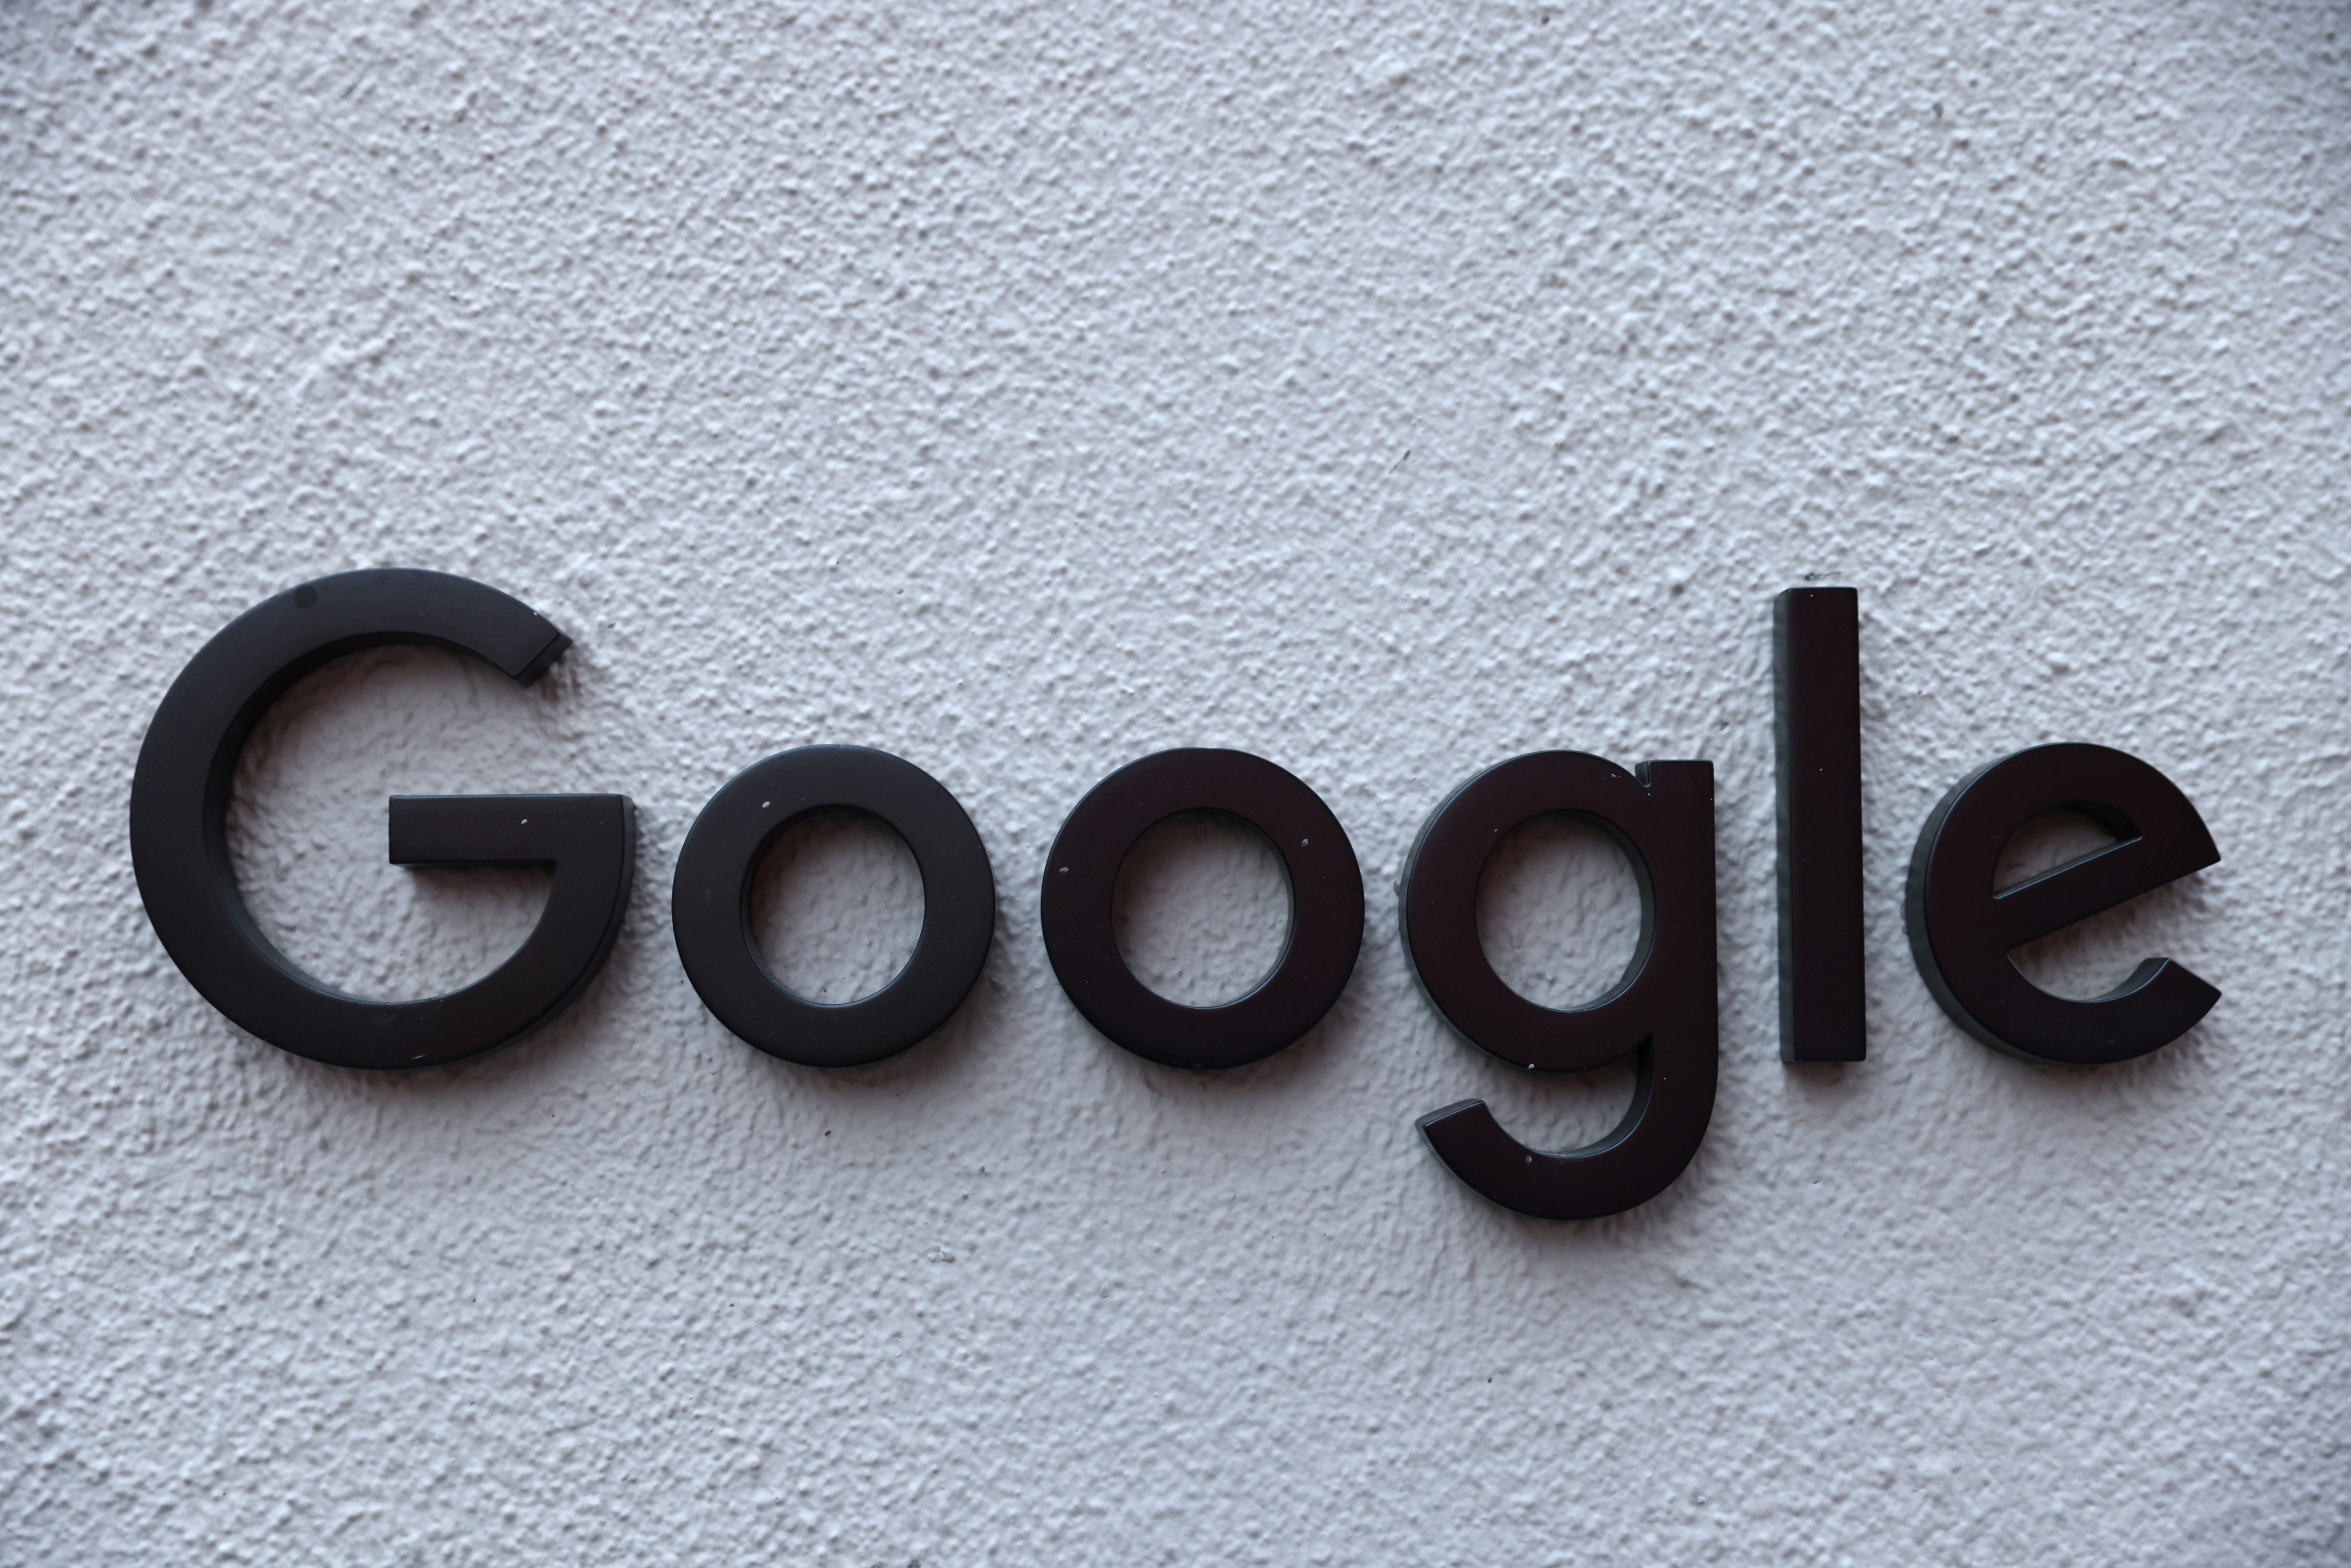 The logo for Google LLC is seen at the Google Store Chelsea in Manhattan, New York City, November 17, 2021. REUTERS/Andrew Kelly